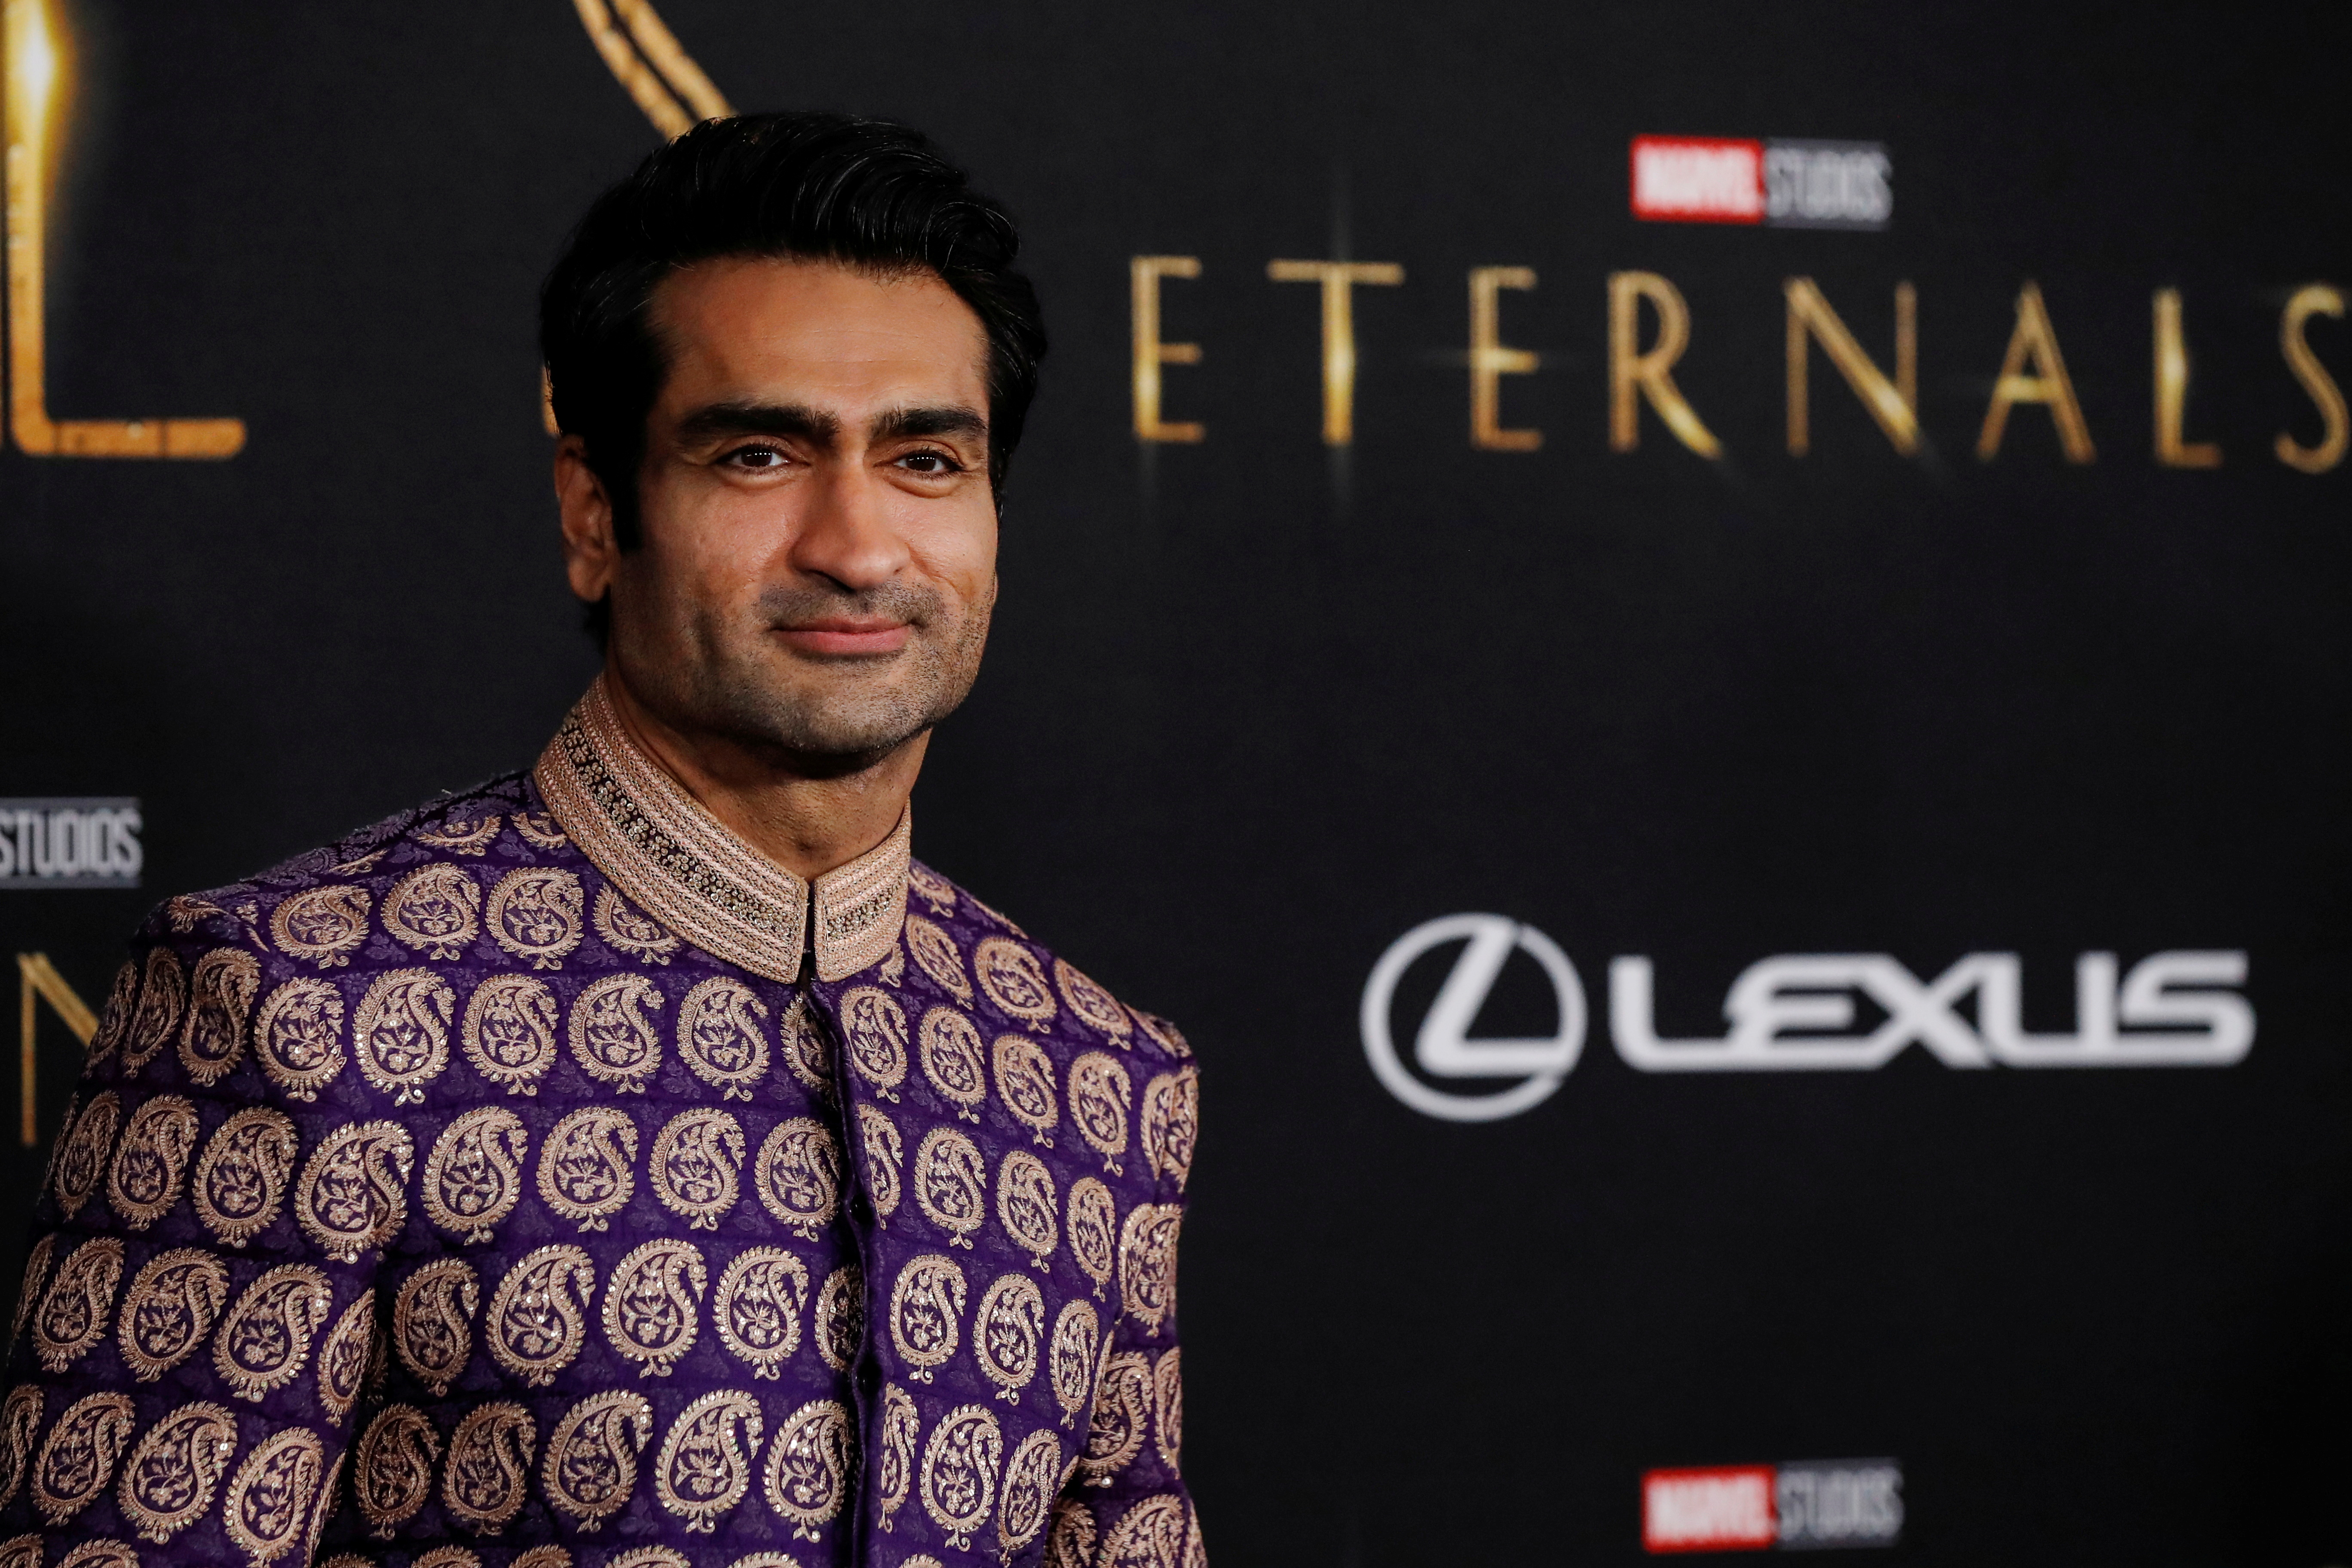 Cast member Kumail Nanjiani poses at the premiere for the film 